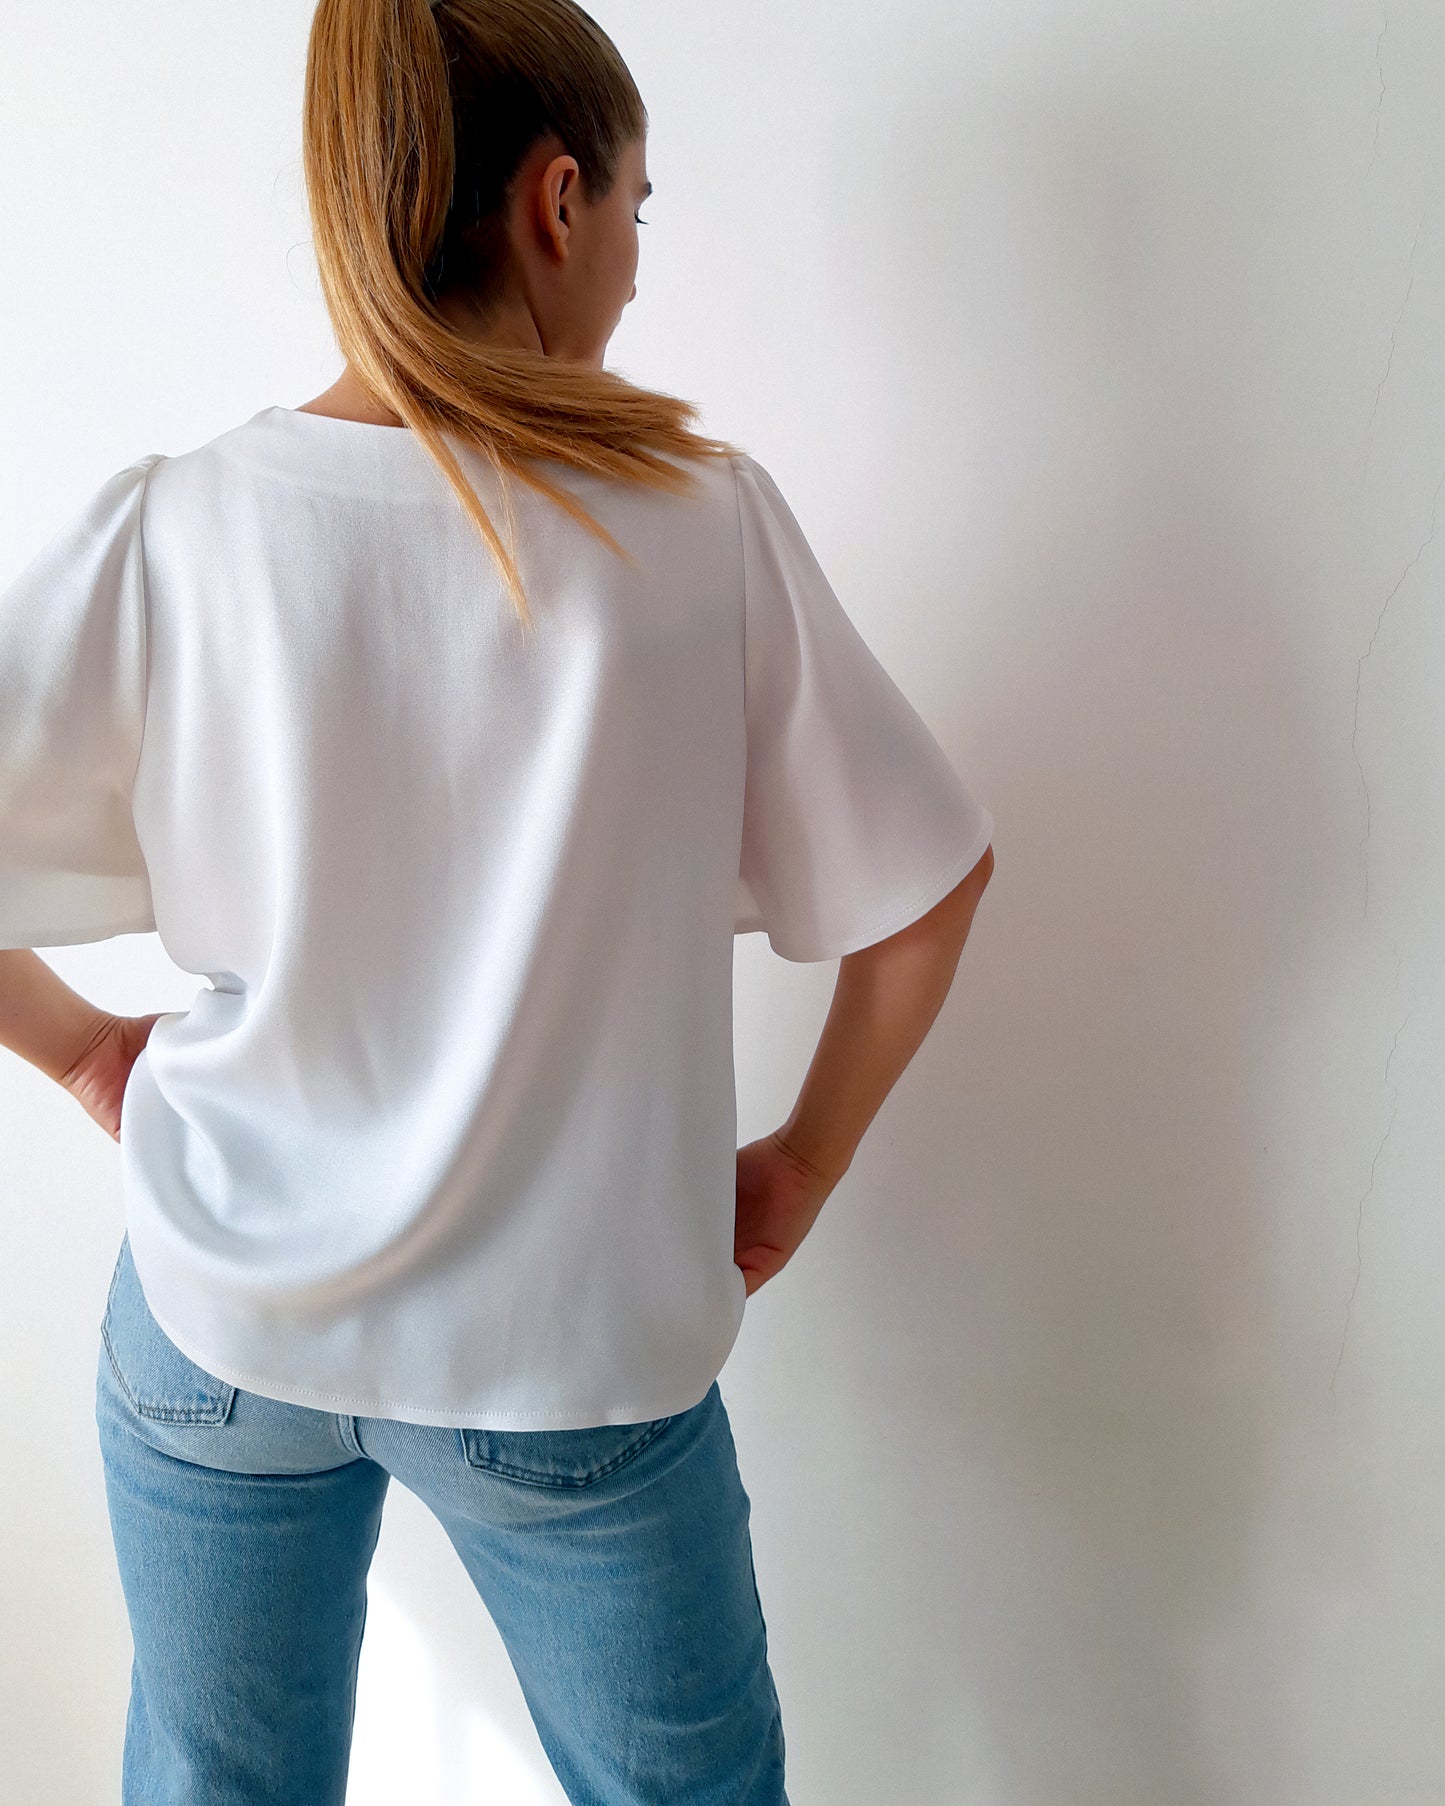 A woman is pictured from behind wearing a white crepe satin blouse with short sleeves, paired with jeans and a ponytail hairstyle.